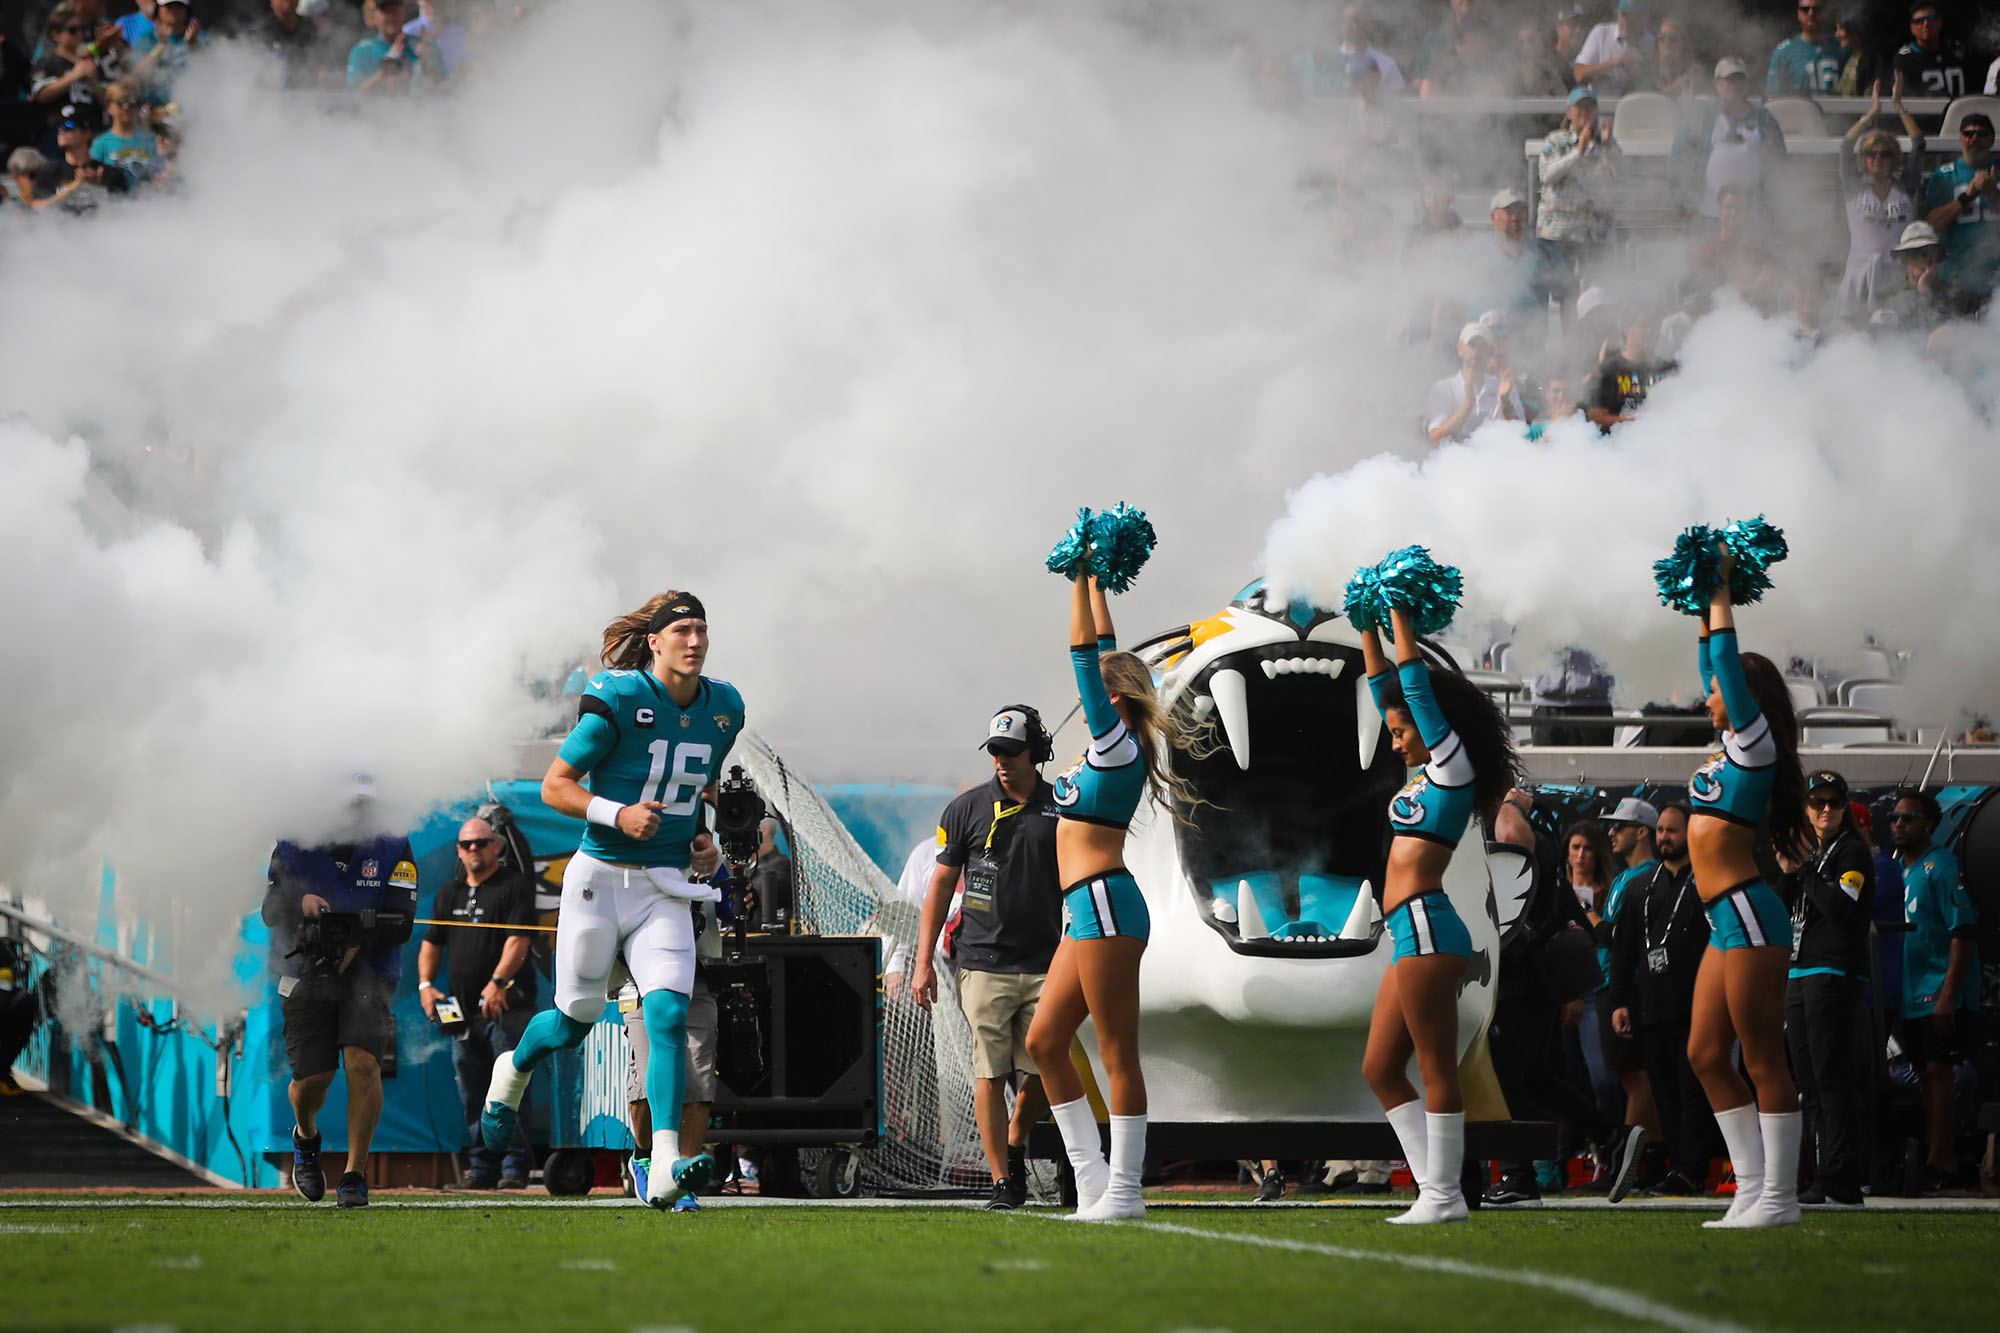 Jacksonville Jaguars quarterback Trevor Lawrence (16) takes the field during introductions before the first half of an NFL football game against the San Francisco 49ers, Sunday, Nov. 21, 2021, in Jacksonville, Fla. (AP Photo/Matt Stamey)